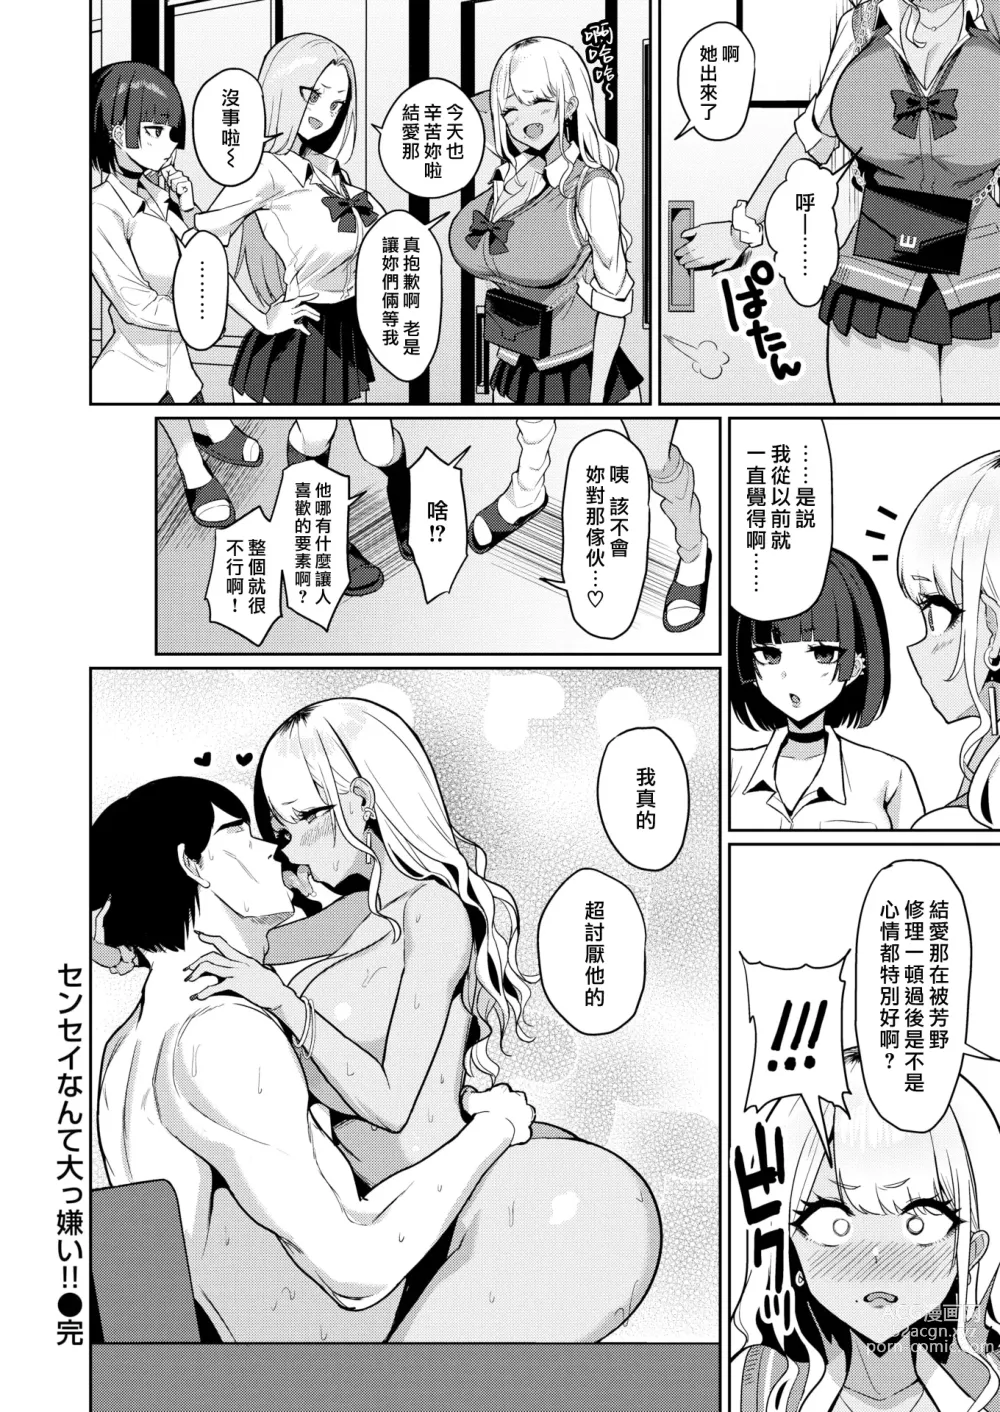 Page 26 of doujinshi センセイなんて大っ嫌い!!